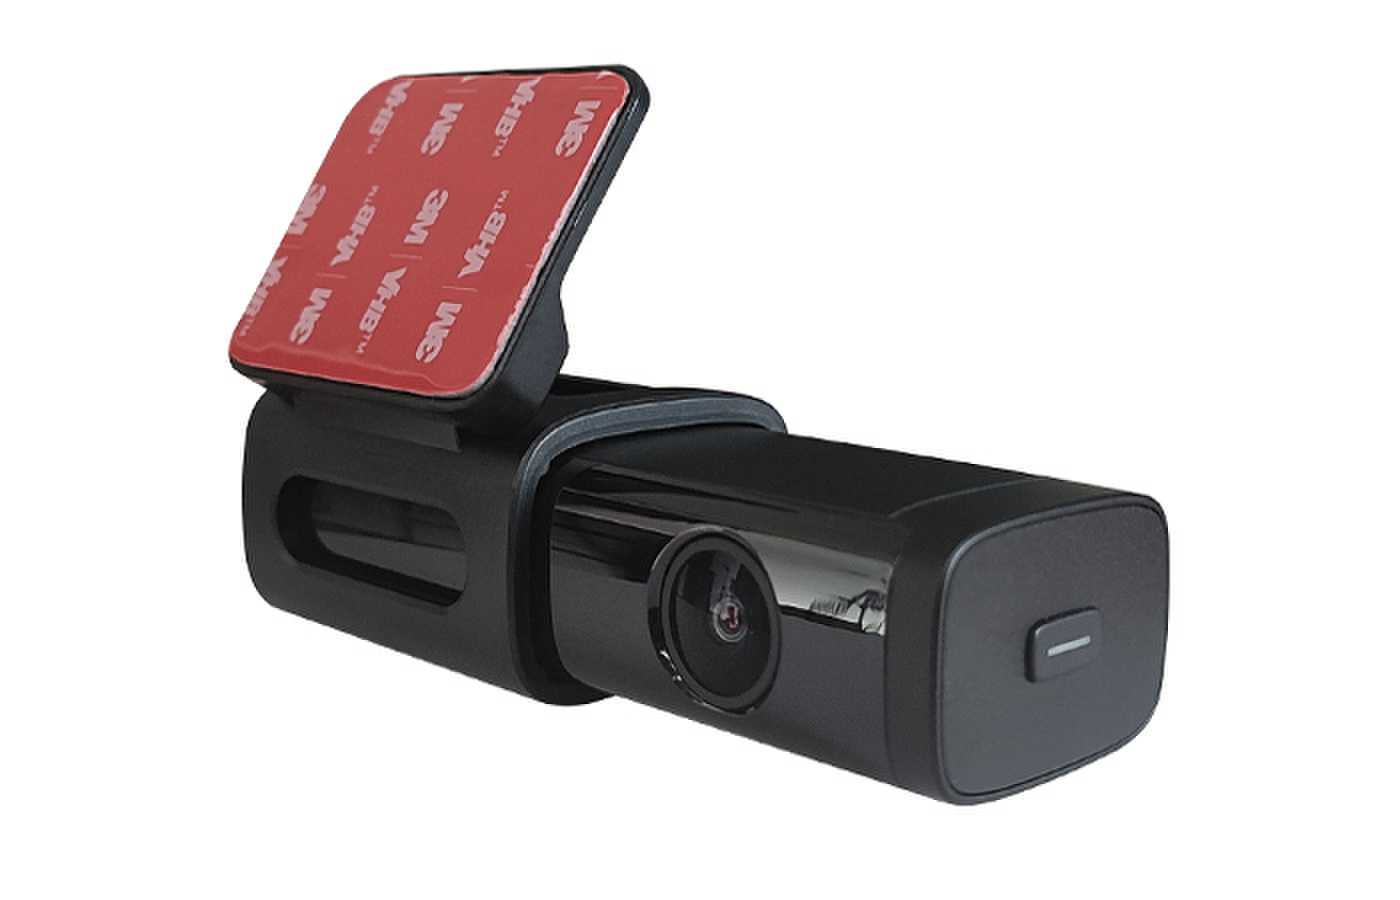 What are the advantages of using an ultracapacitor for dashcam?